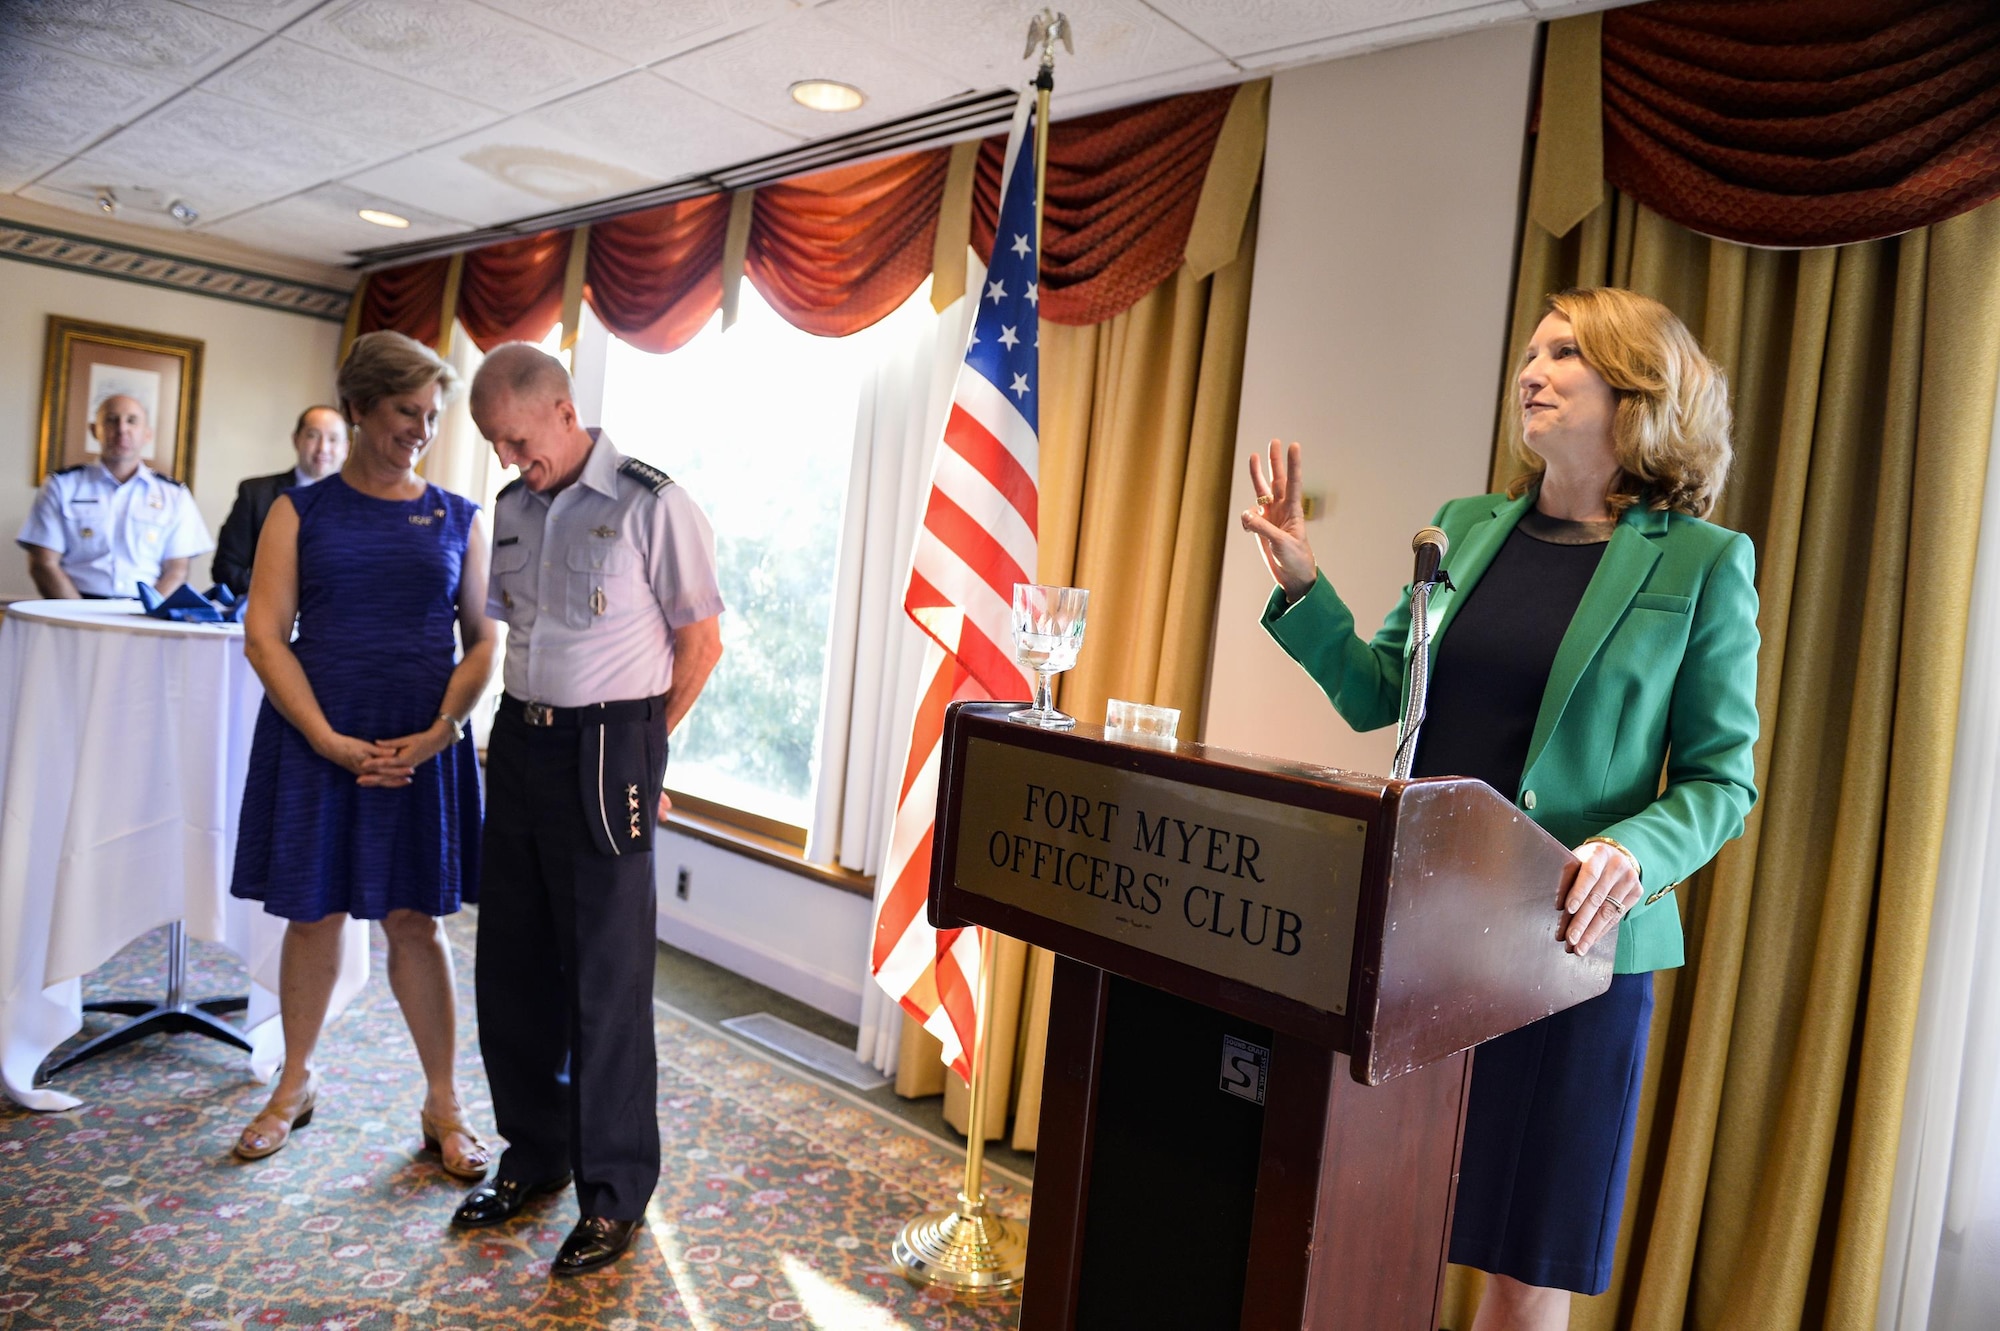 Air Force Undersecretary Lisa S. Disbrow gives remarks as Gen. Stephen W. Wilson is welcomed as the service's new vice chief of staff at a reception Aug. 26, 2016, at the Fort Myer Officer's Club, Va. (U.S. Air Force photo/Tech. Sgt. Joshua L. DeMotts)